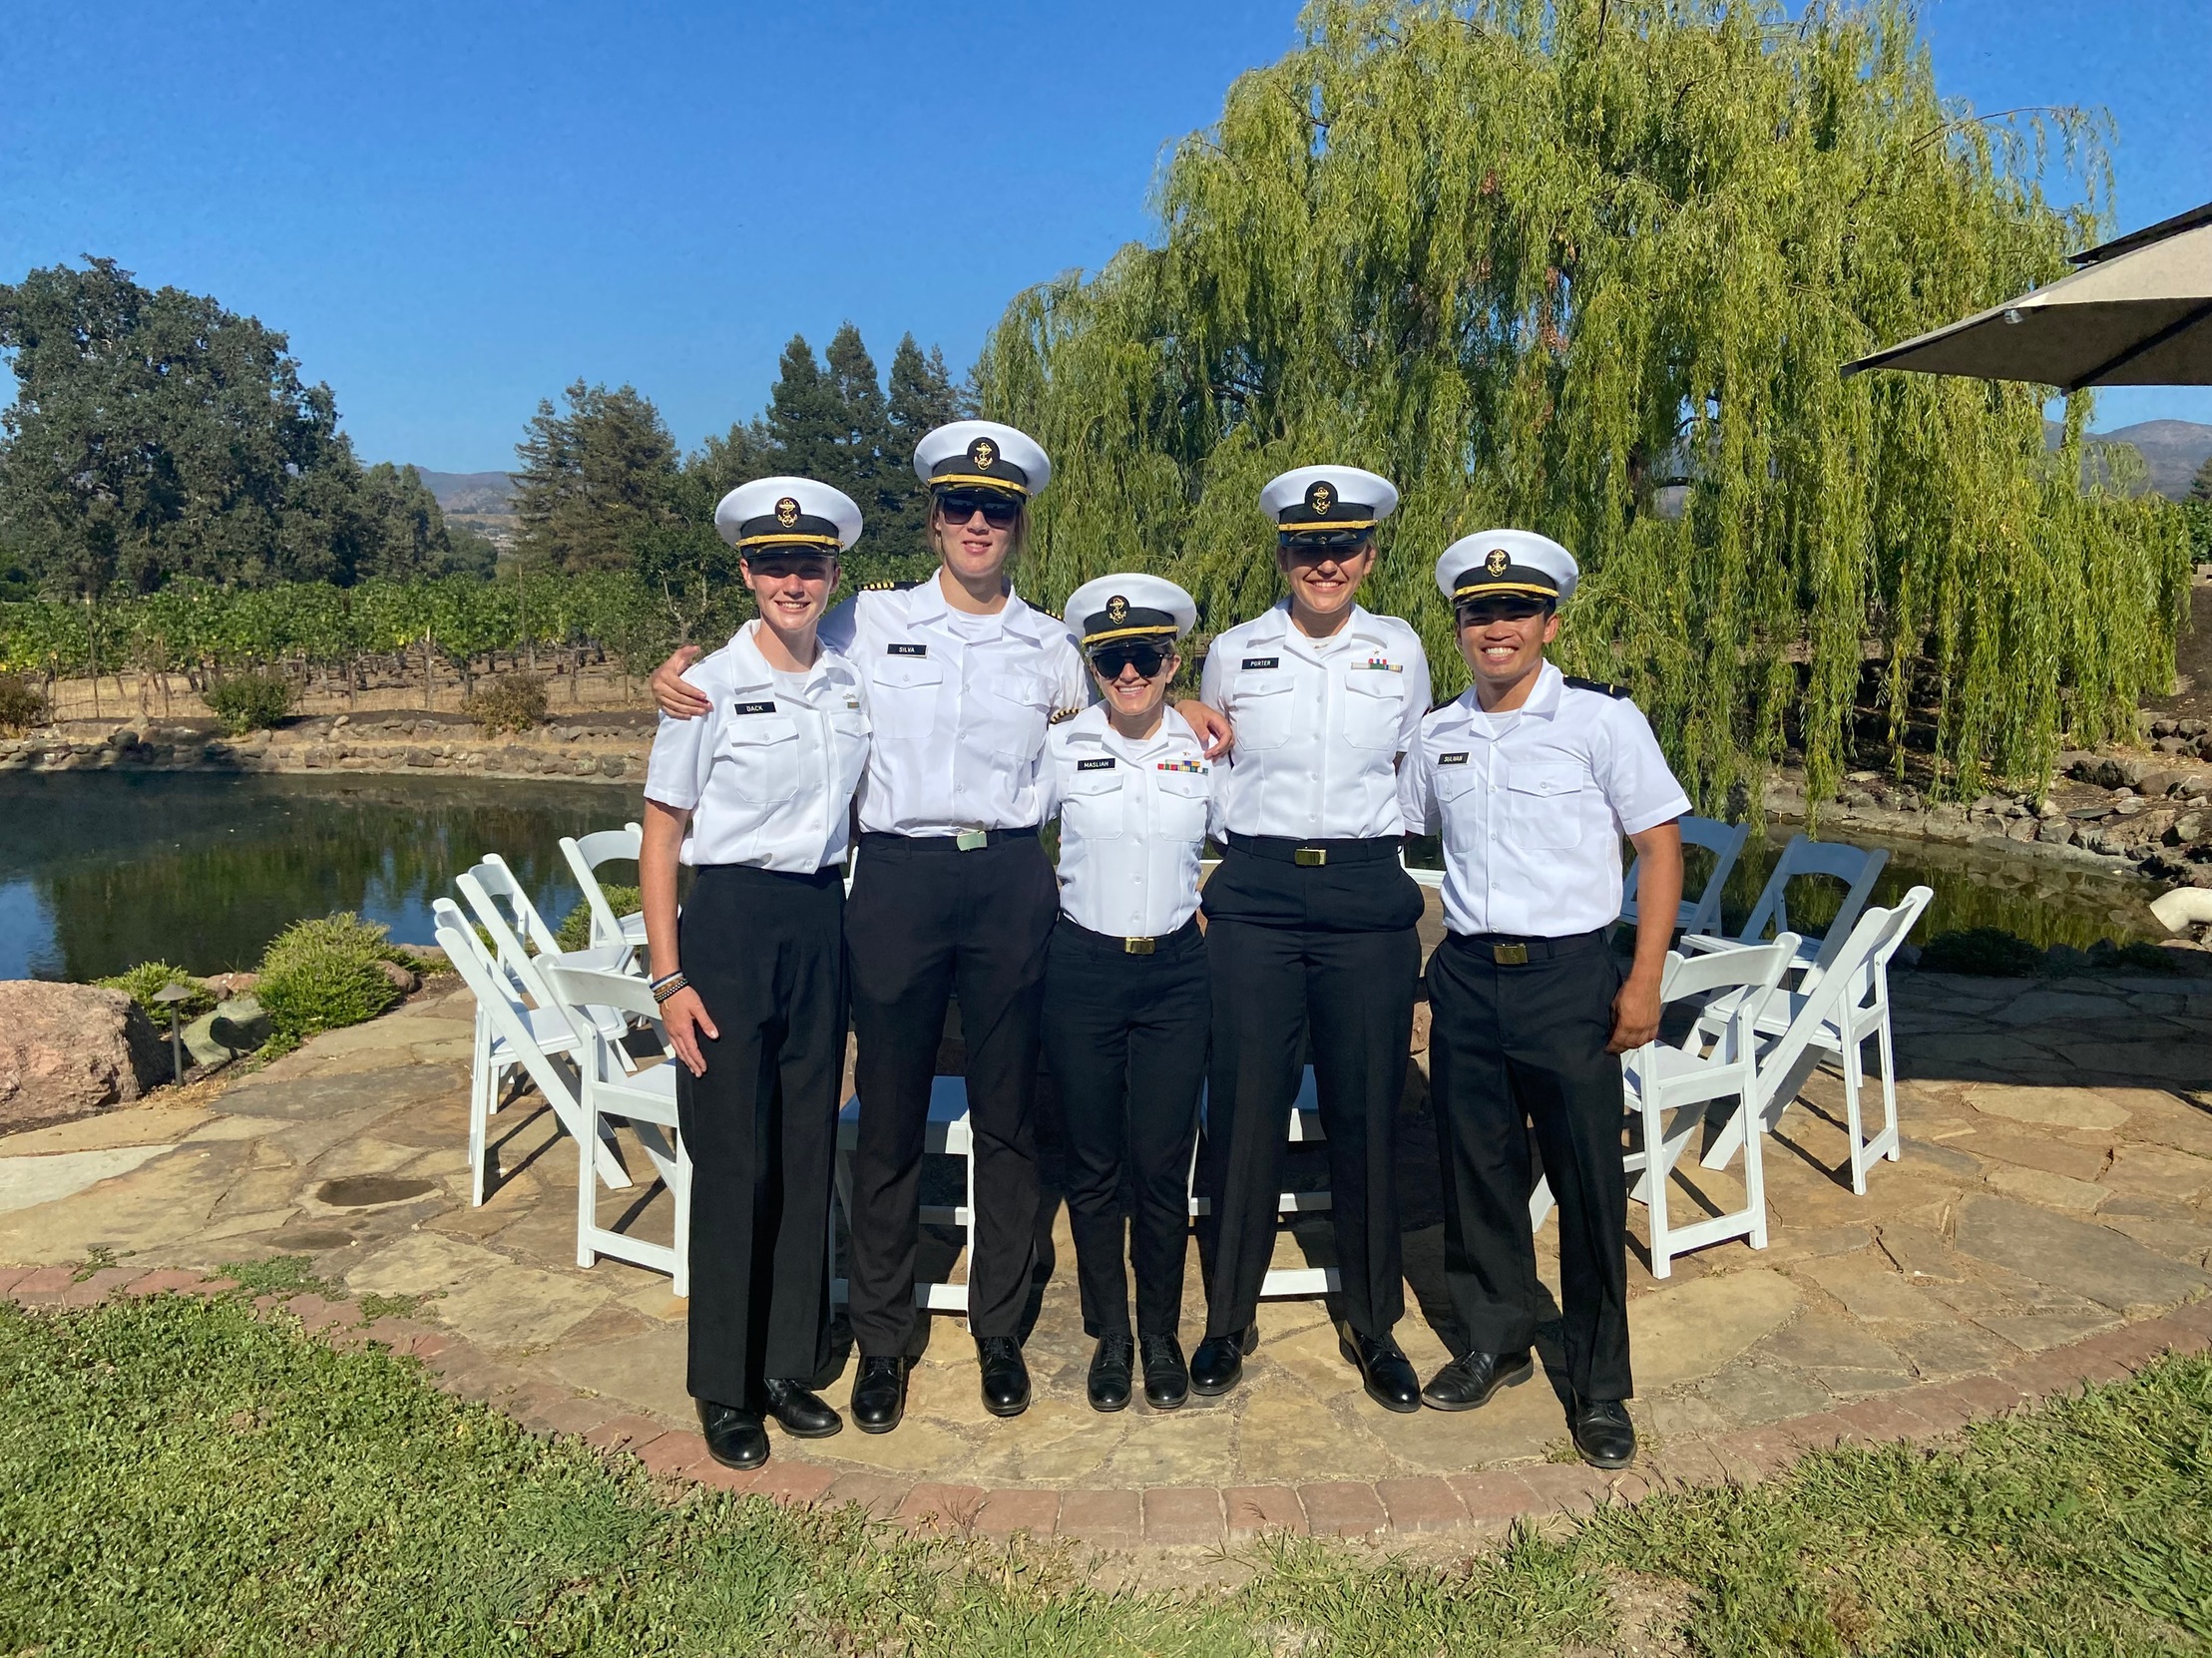 Directly support cadet-athletes through Cal Maritime Athletics’ annual golf tournament